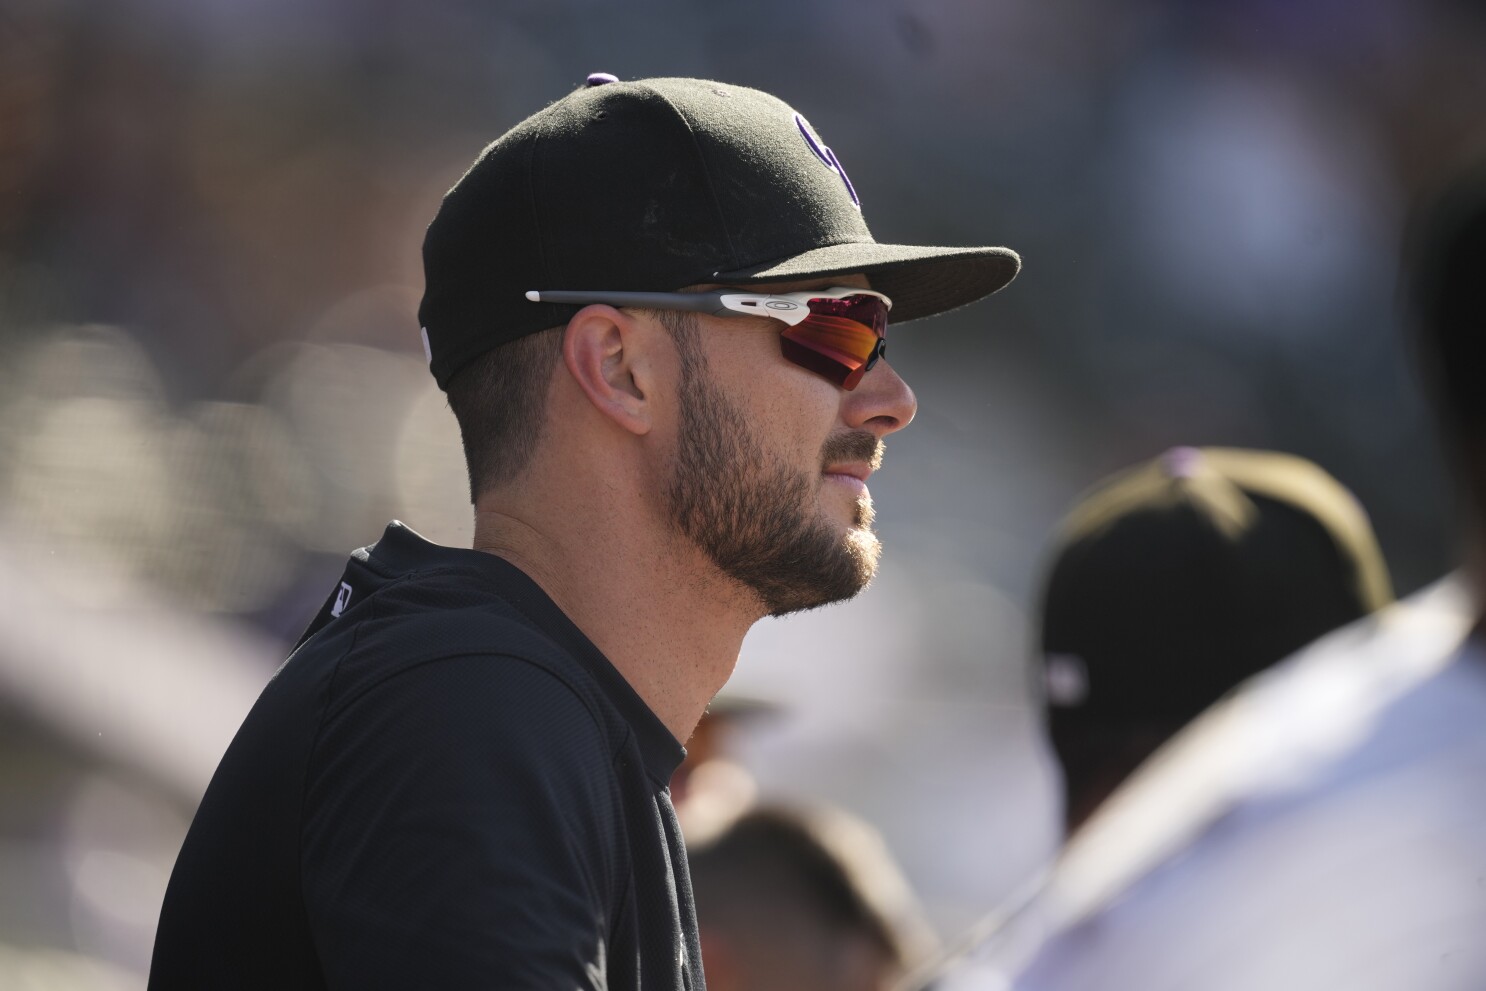 Kris Bryant injury: Rockies pull outfielder from game with injury